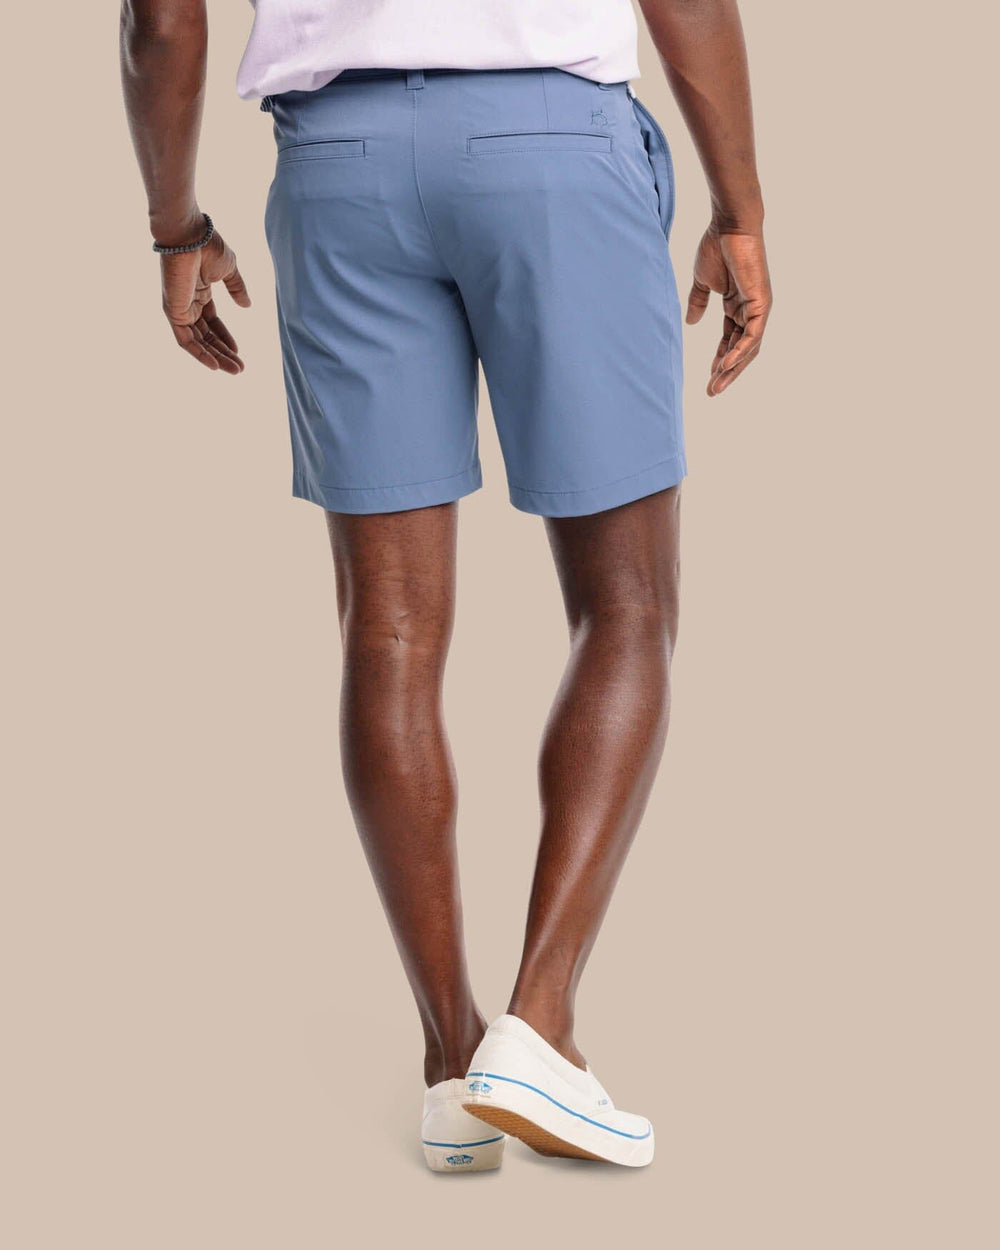 The back view of the Southern Tide brrr die performance short 1 by Southern Tide - Dark Seas